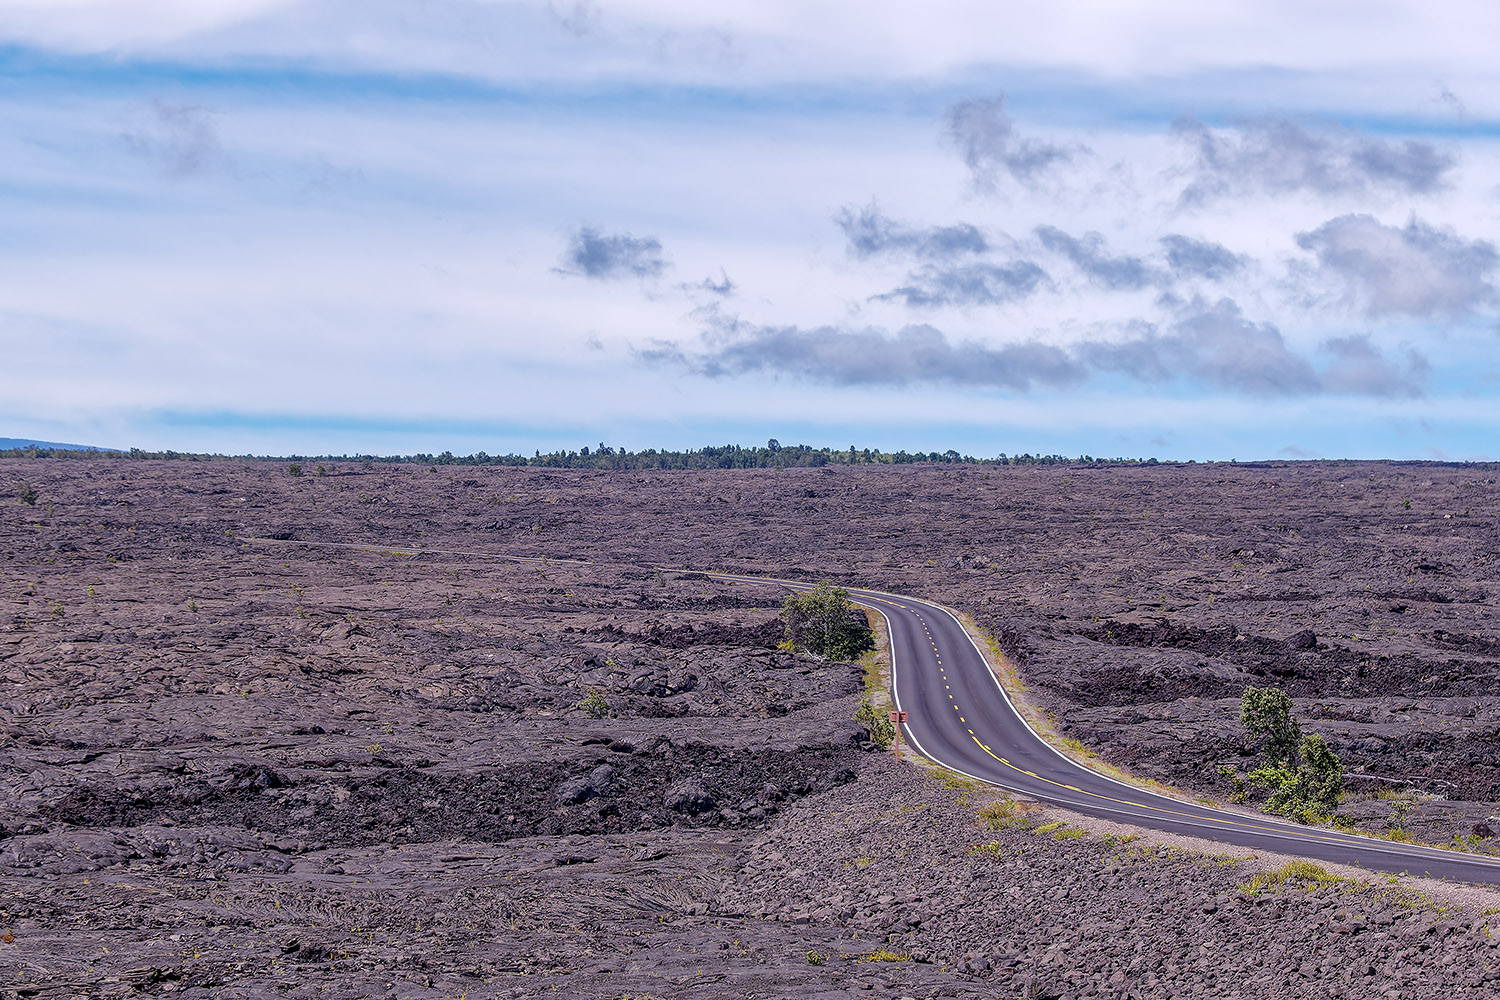 Taking the Chain of Craters Road back to civilization, Hilo, and the airport for our flight back to Honolulu